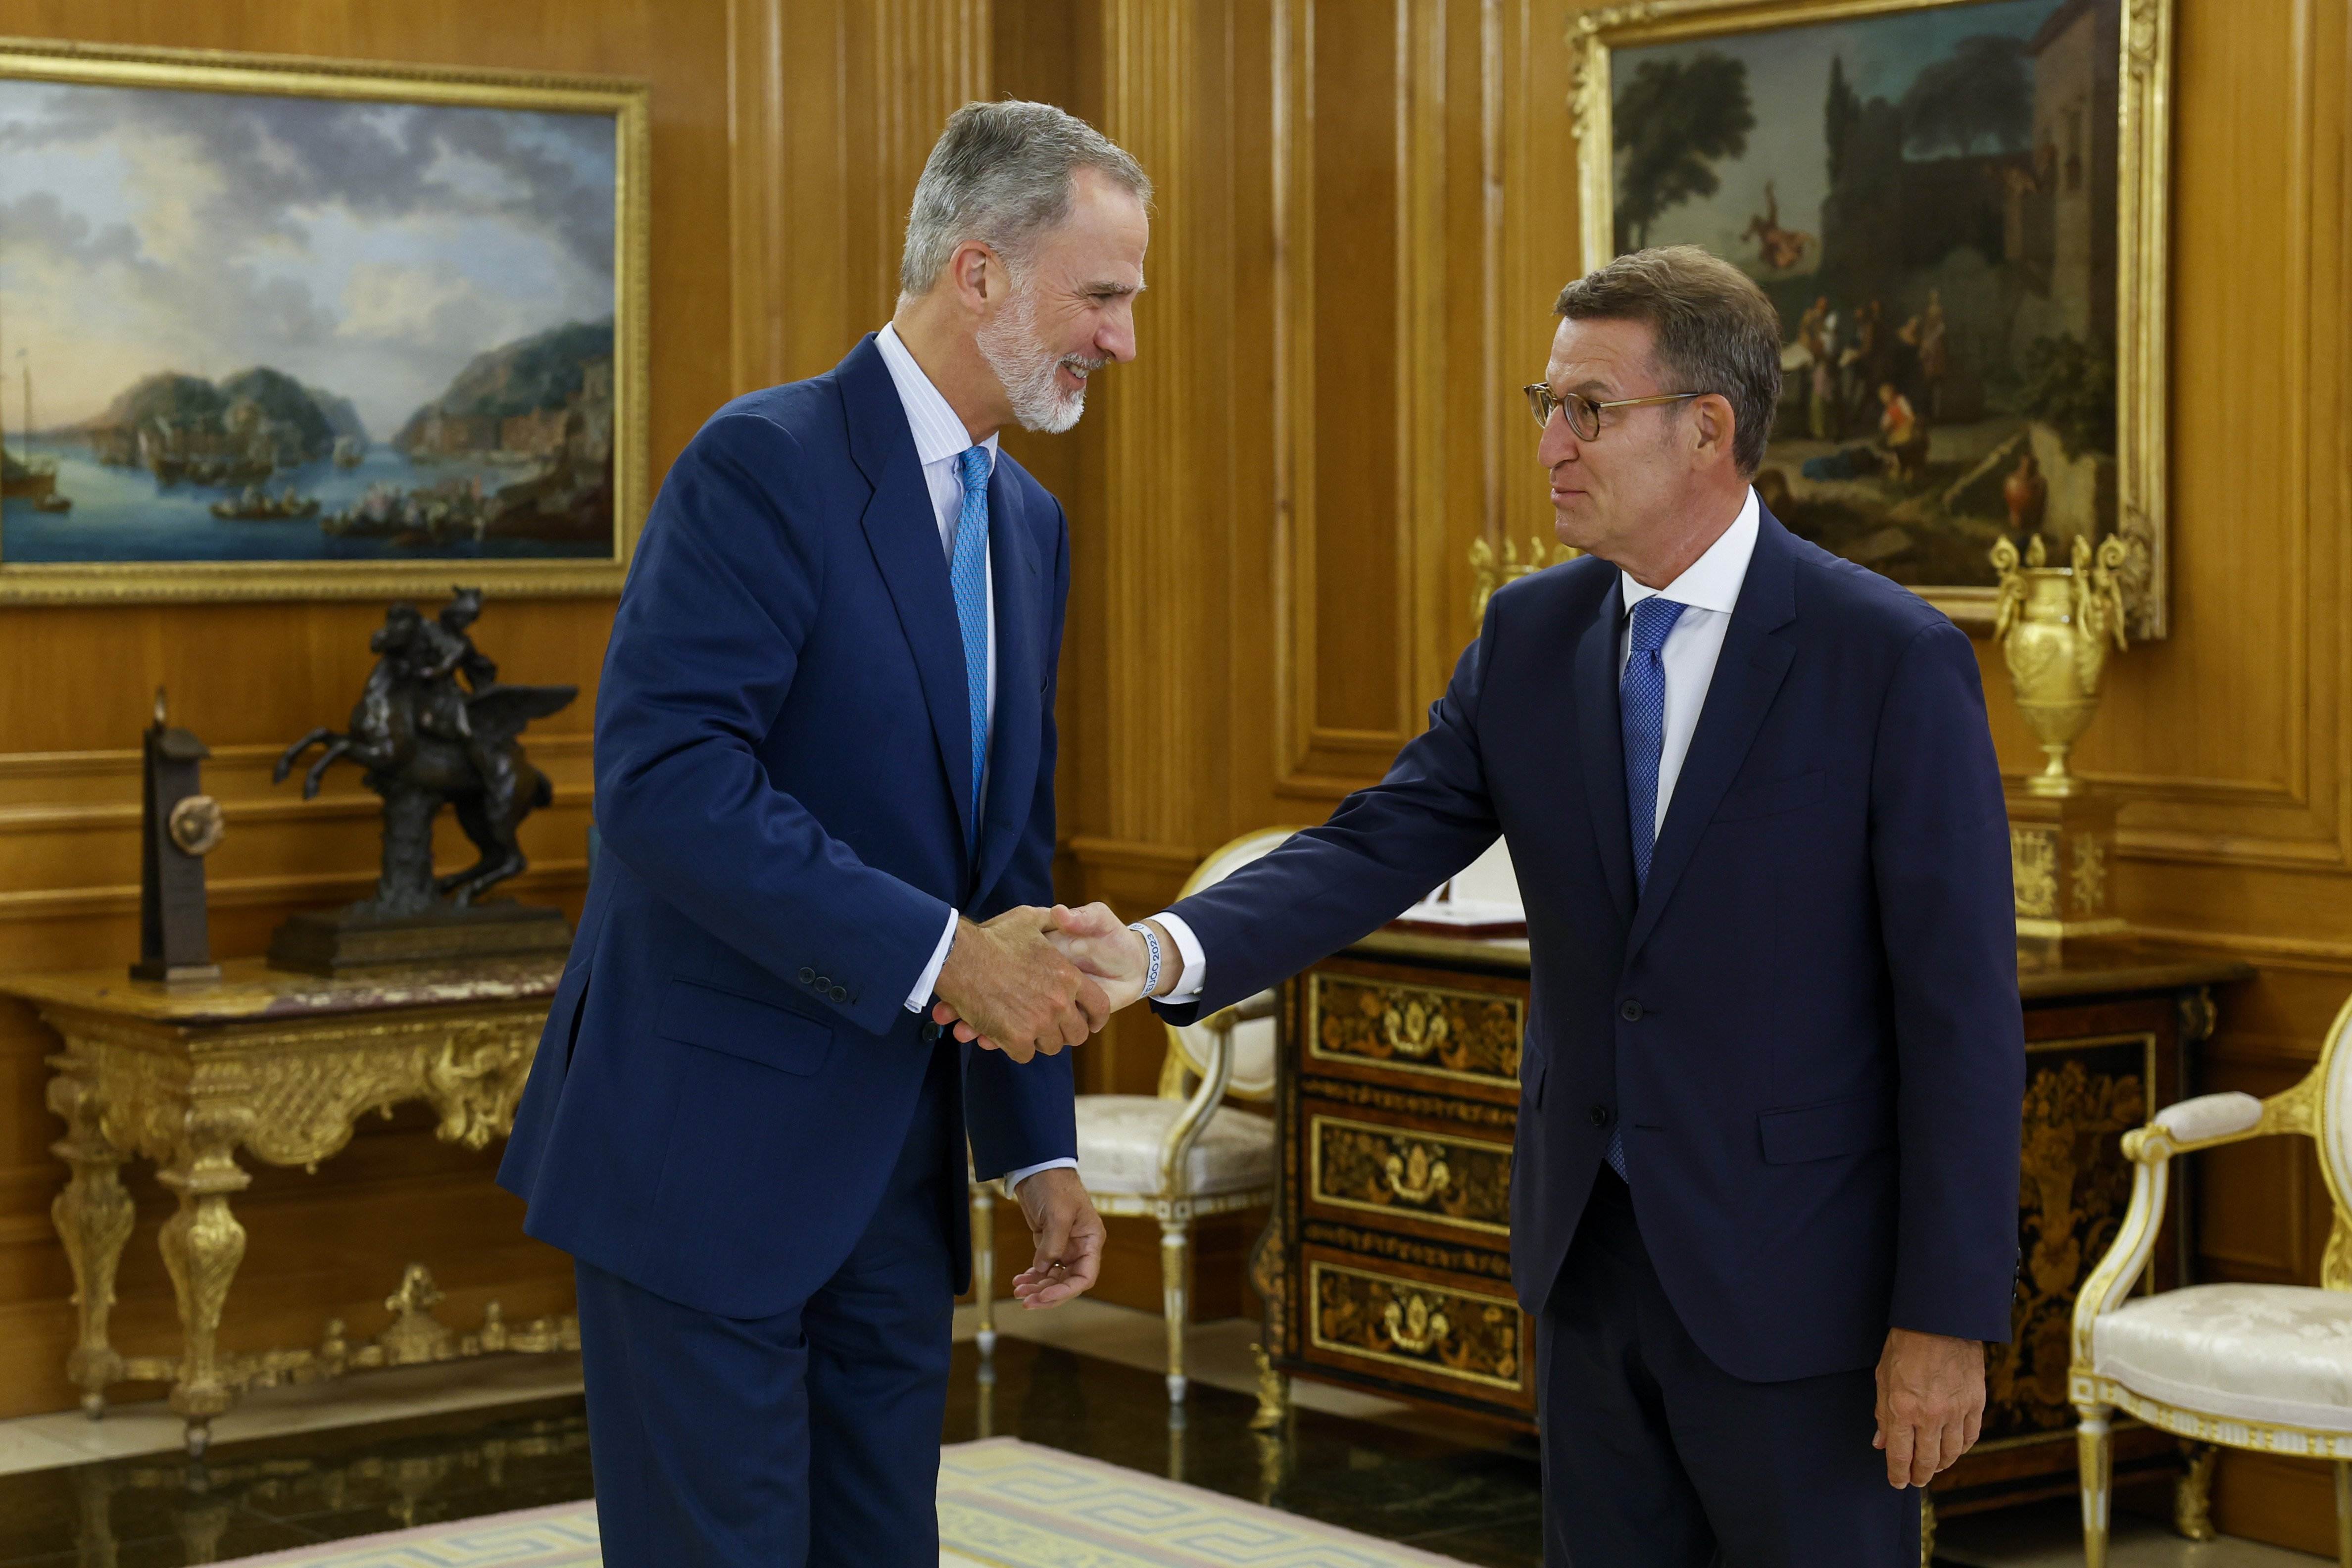 King Felipe VI chooses the PP's Feijóo to be the candidate for investiture as Spain's new PM